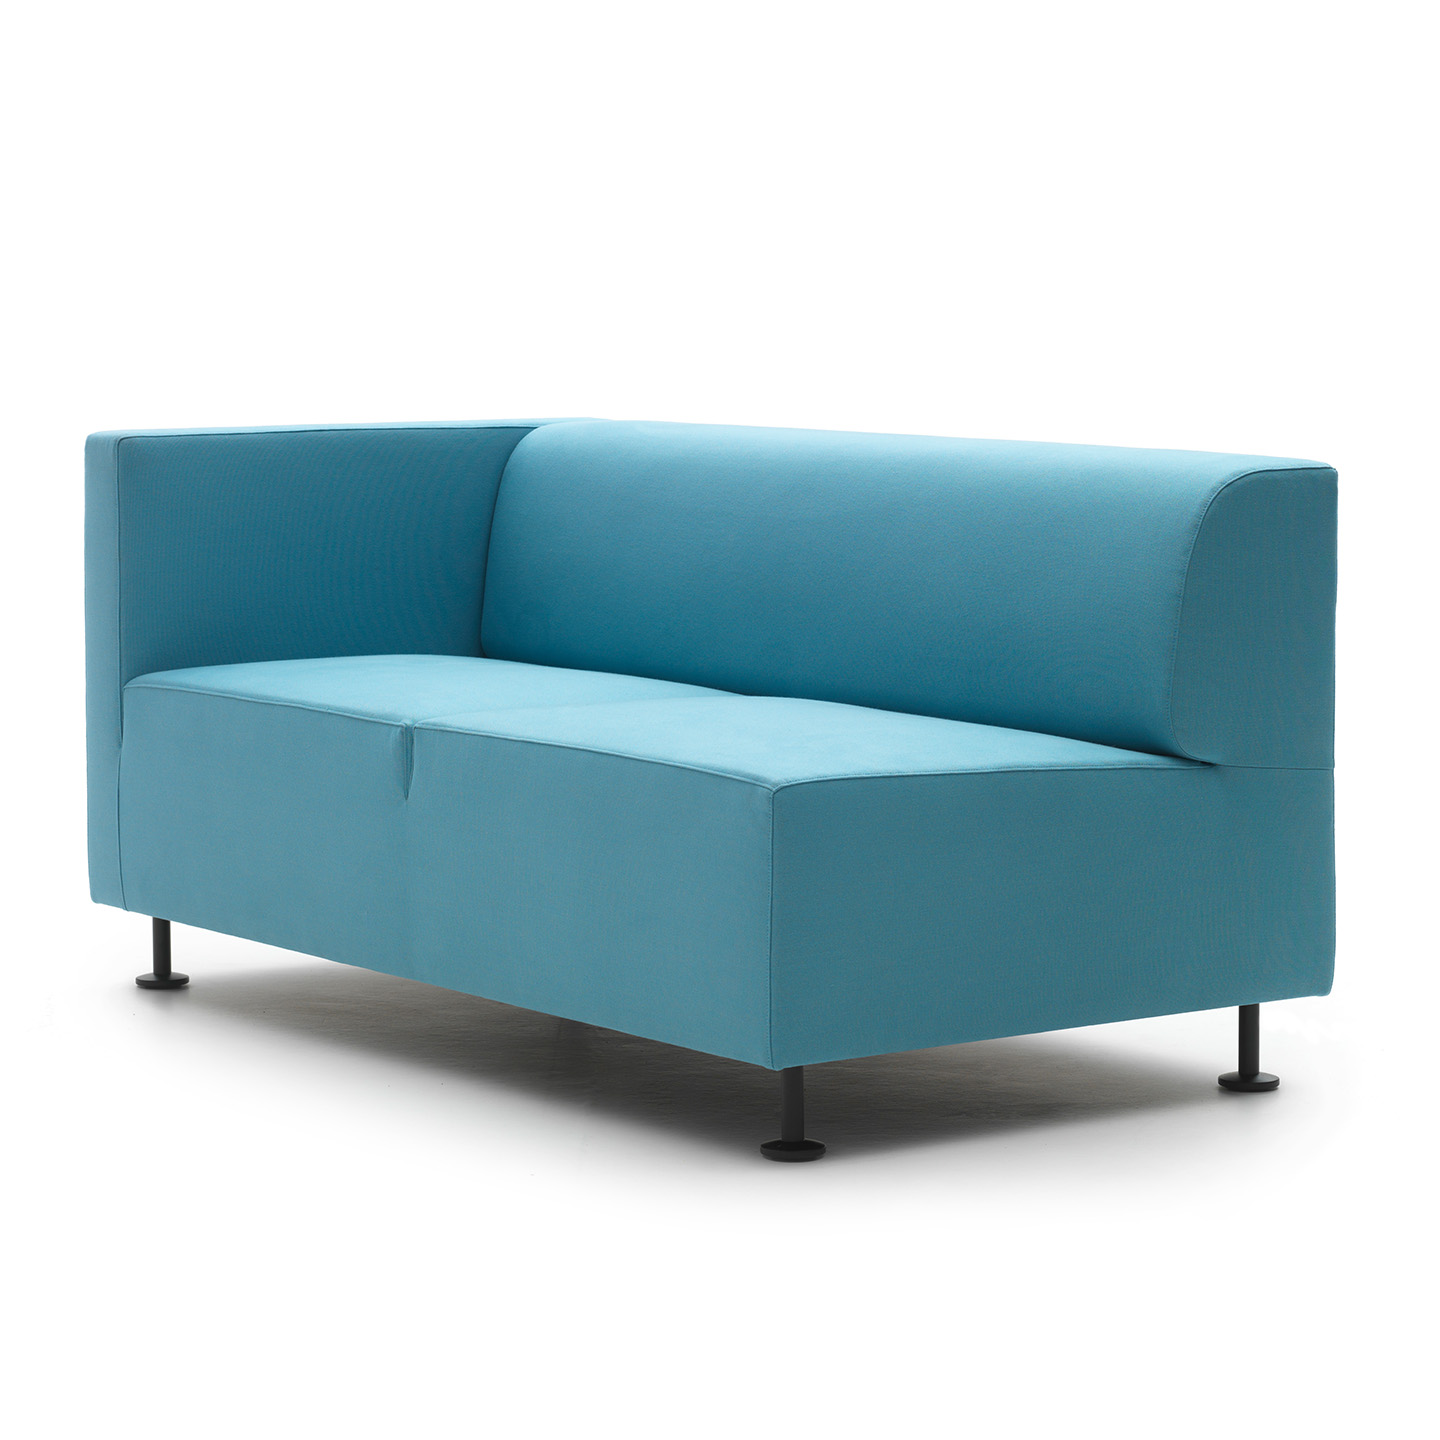 Haworth Gambetta lounge sofa in blue color for casual seating